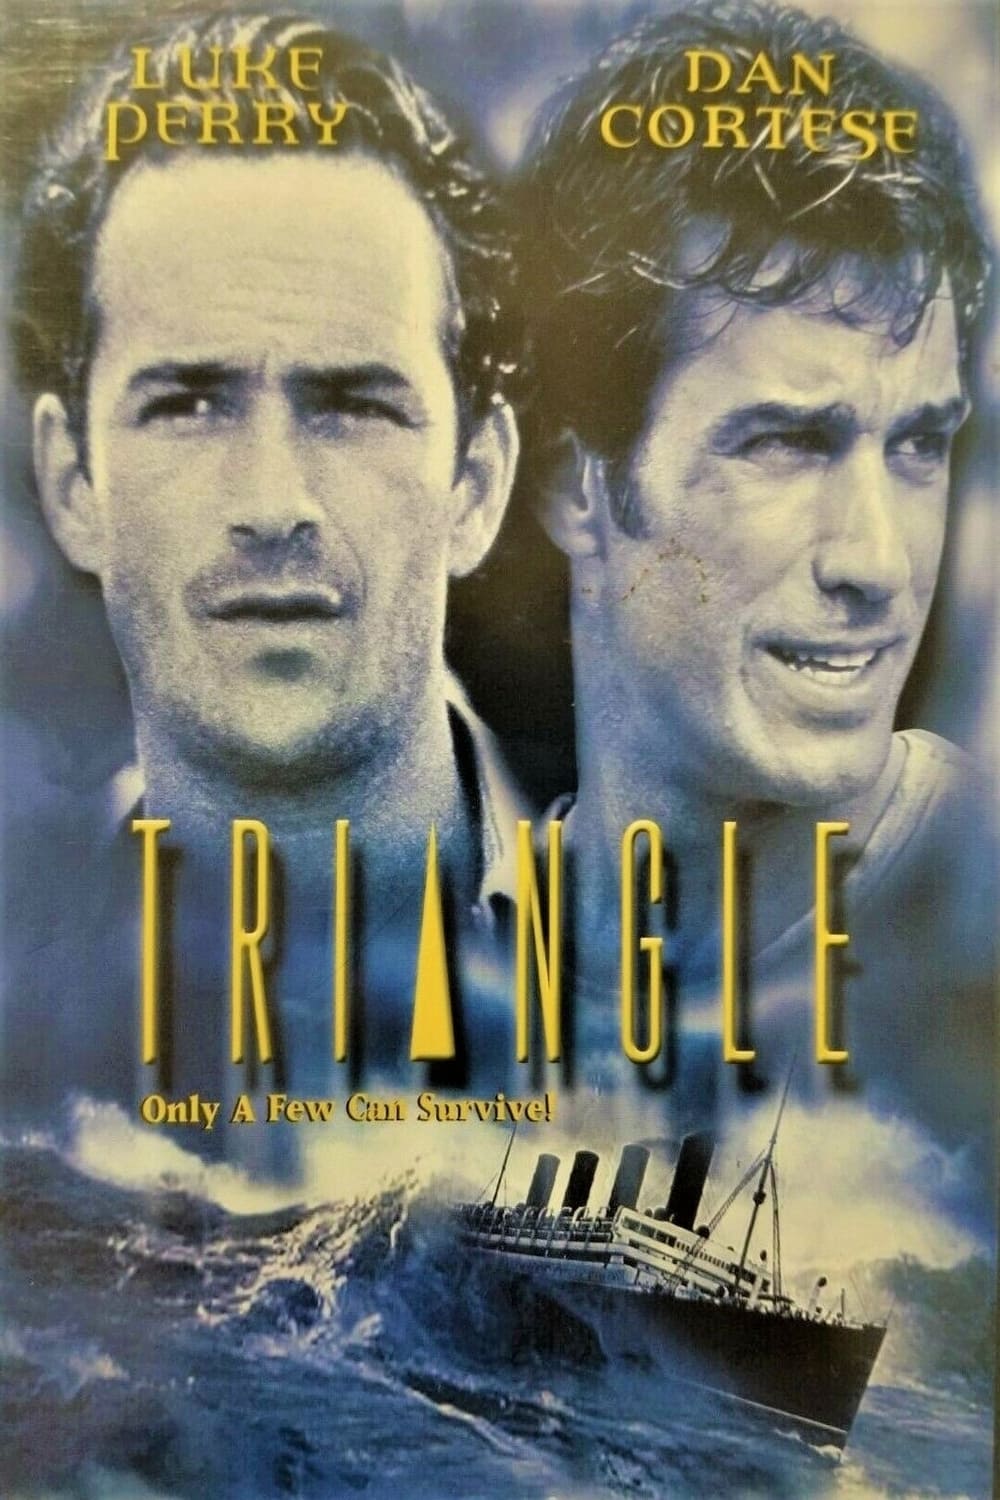 The Triangle (2001)